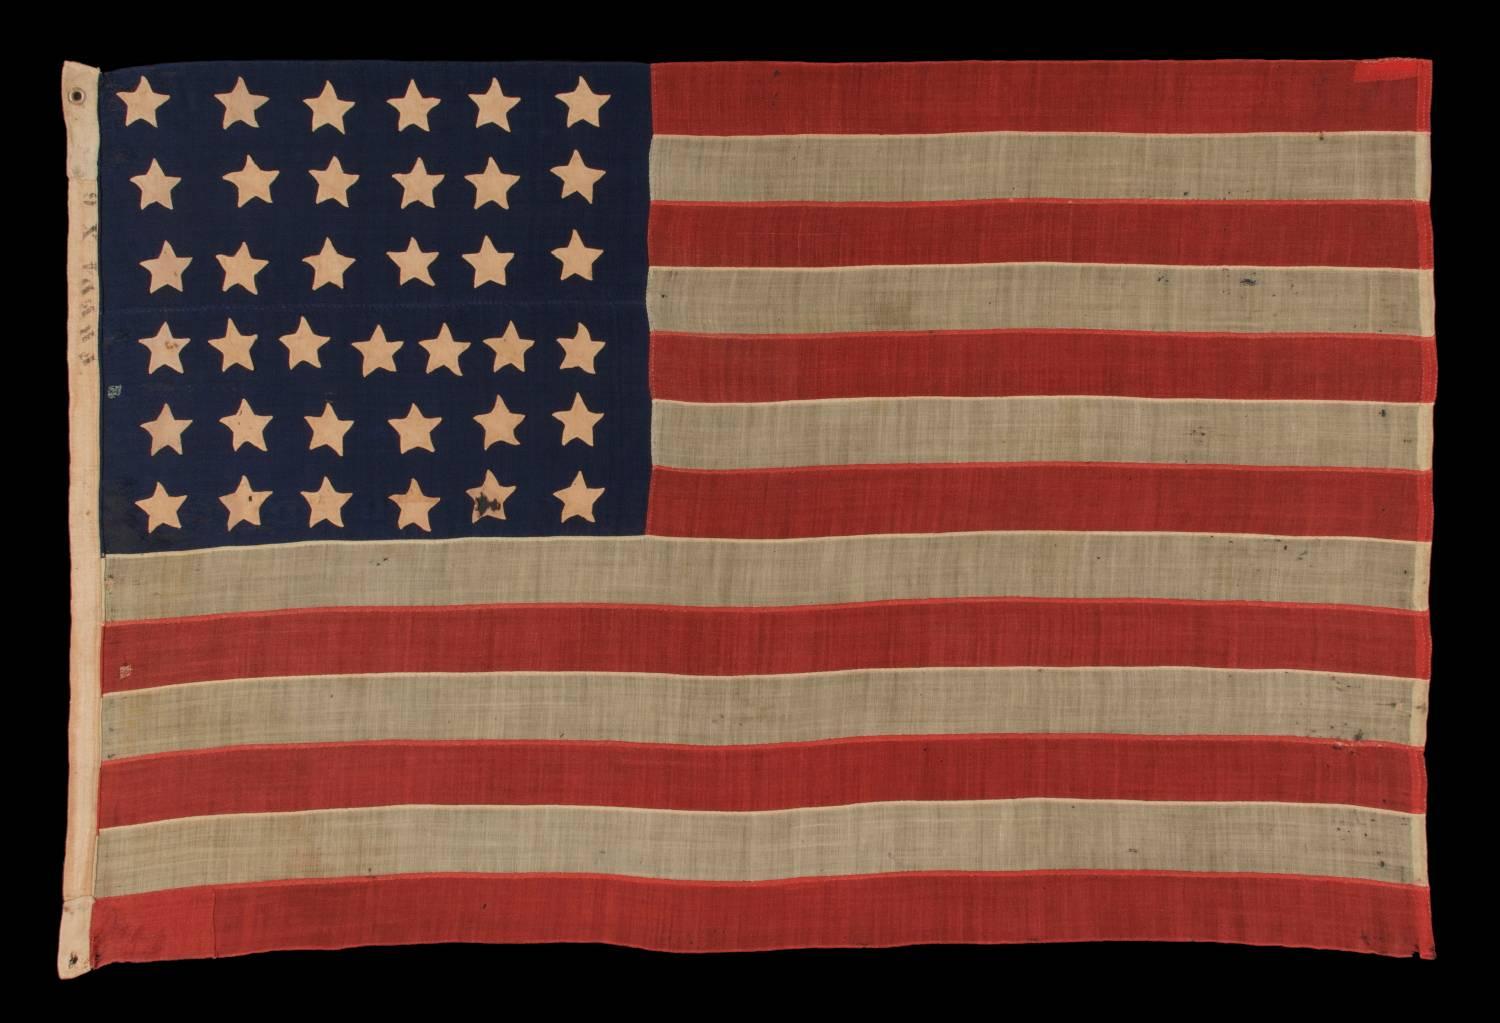 37 single appliquéd stars on an antique American flag made during the reconstruction era, during the Indian wars, between 1867-1876, when Nebraska was the most recent state to join the union:

 37 hand-sewn, single-appliquéd stars and 13 hand-sewn